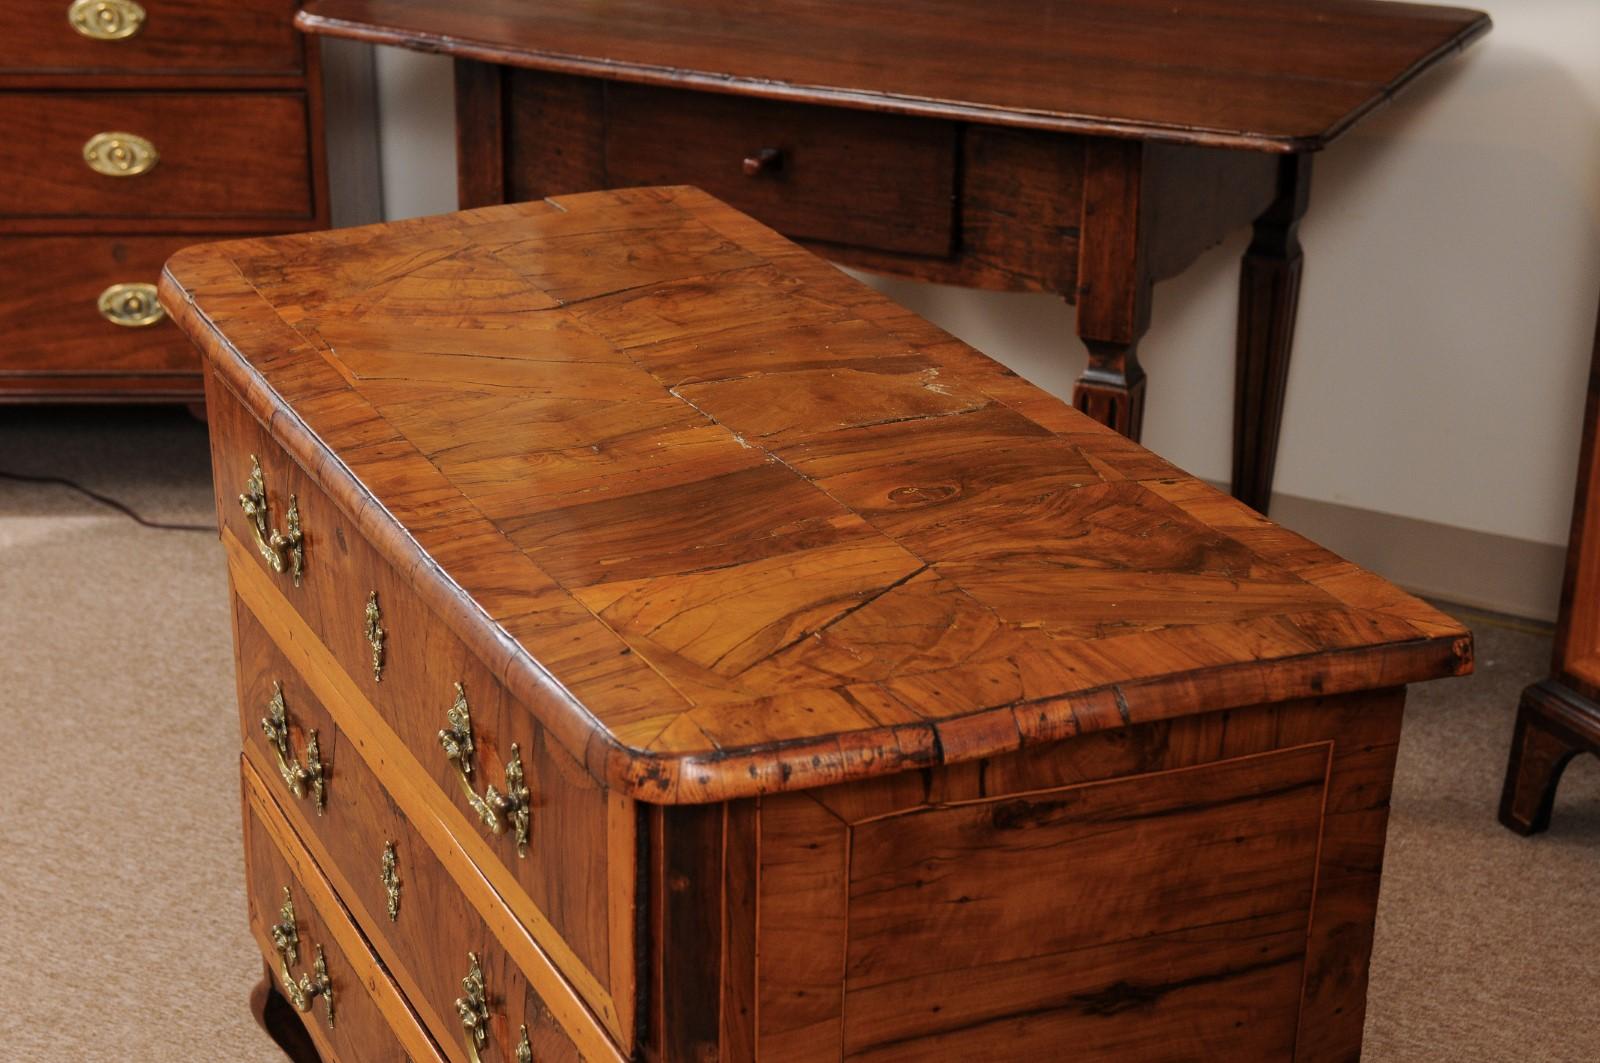 18th Century Italian 3-Drawer Commode in Olivewood with Cabriole Legs For Sale 13